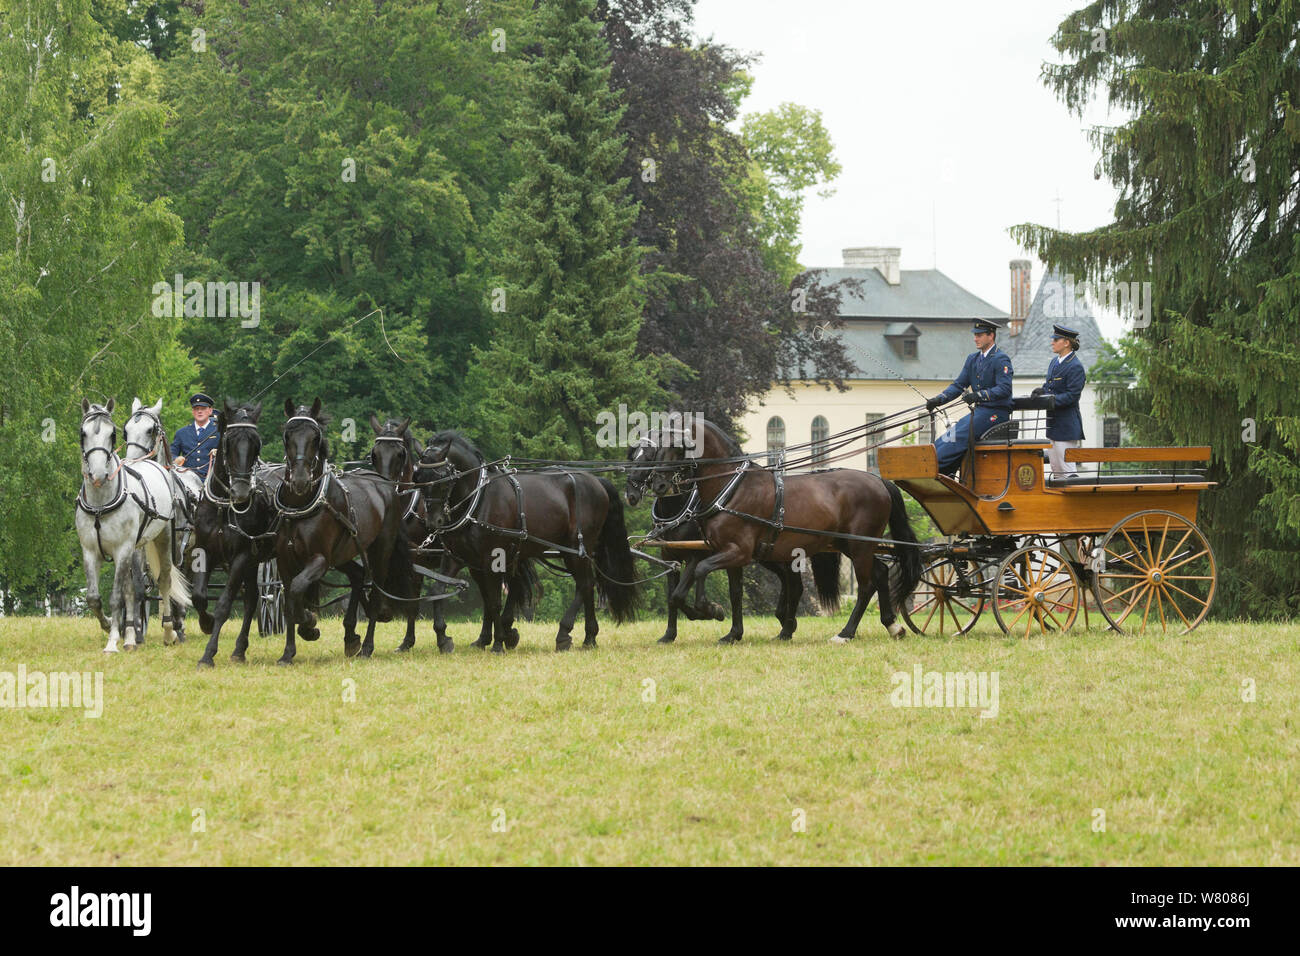 Traditionally dressed staff driving rare black and white Kladruber stallions, at the Great Riding Festival, in Slatinany National Stud, Pardubice Region, Czech Republic. June 2015. Stock Photo